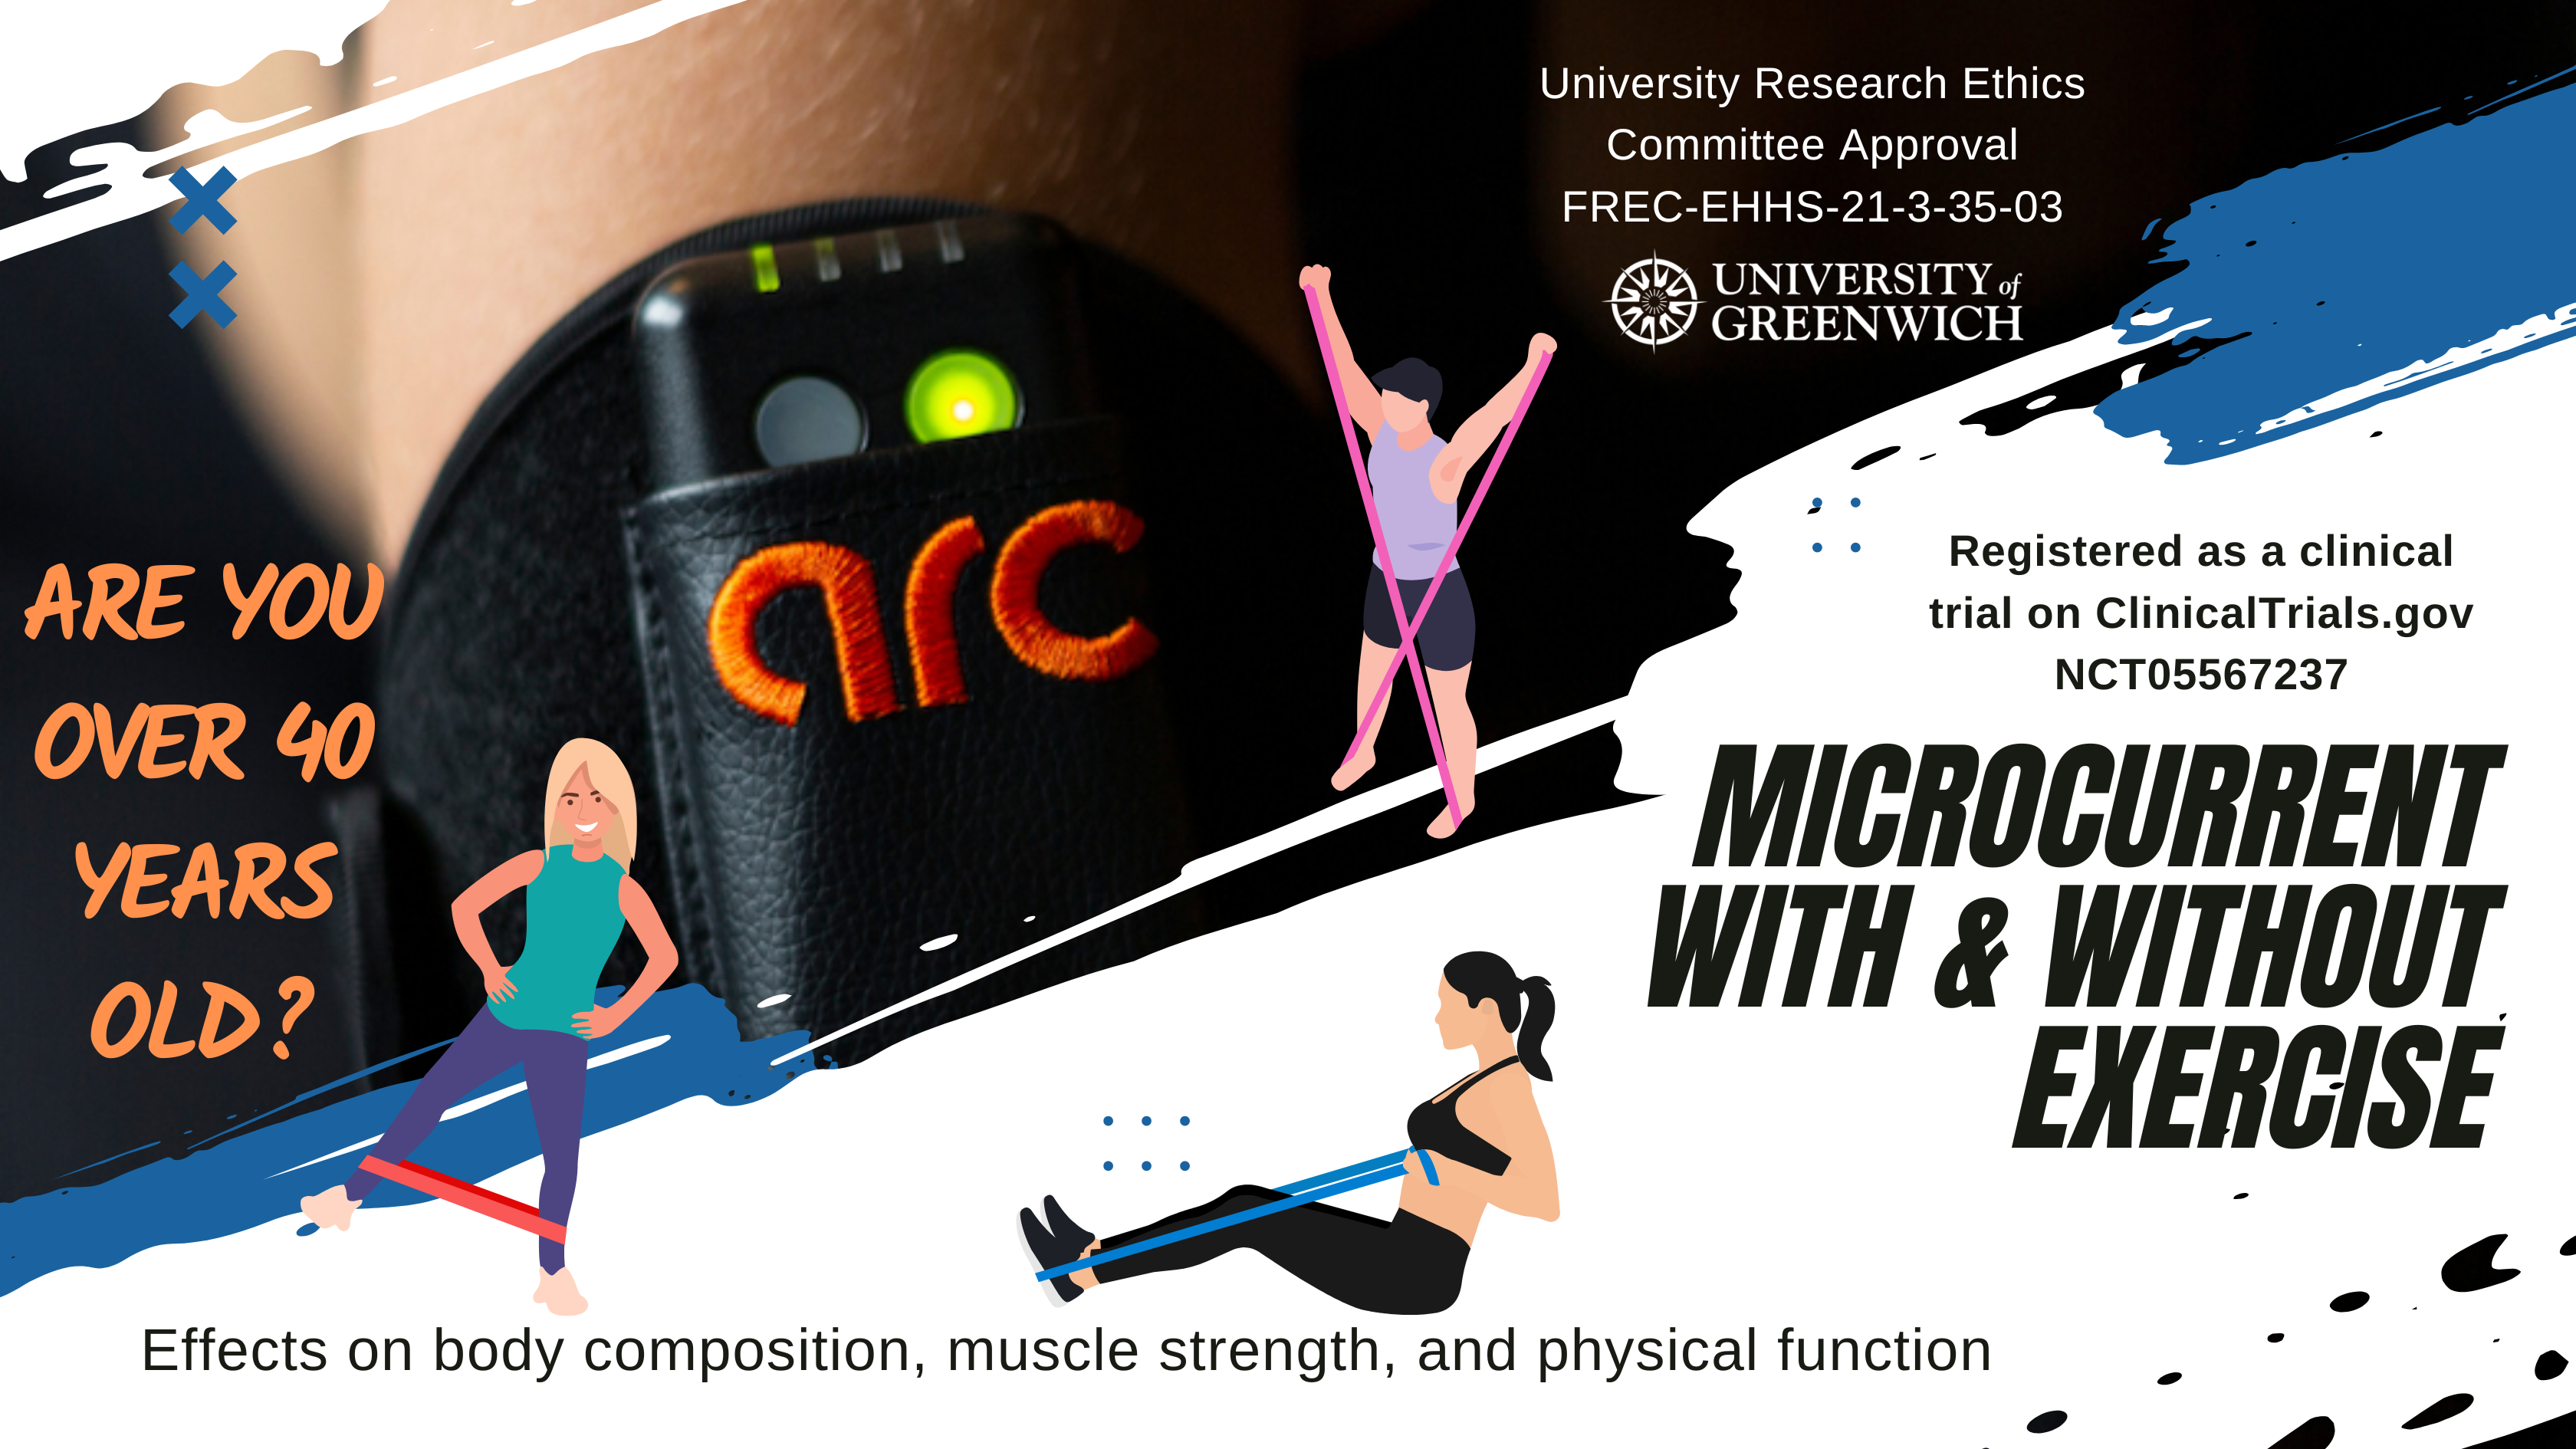 Microcurrent with and without Exercise Programme for Adults over 40 in London